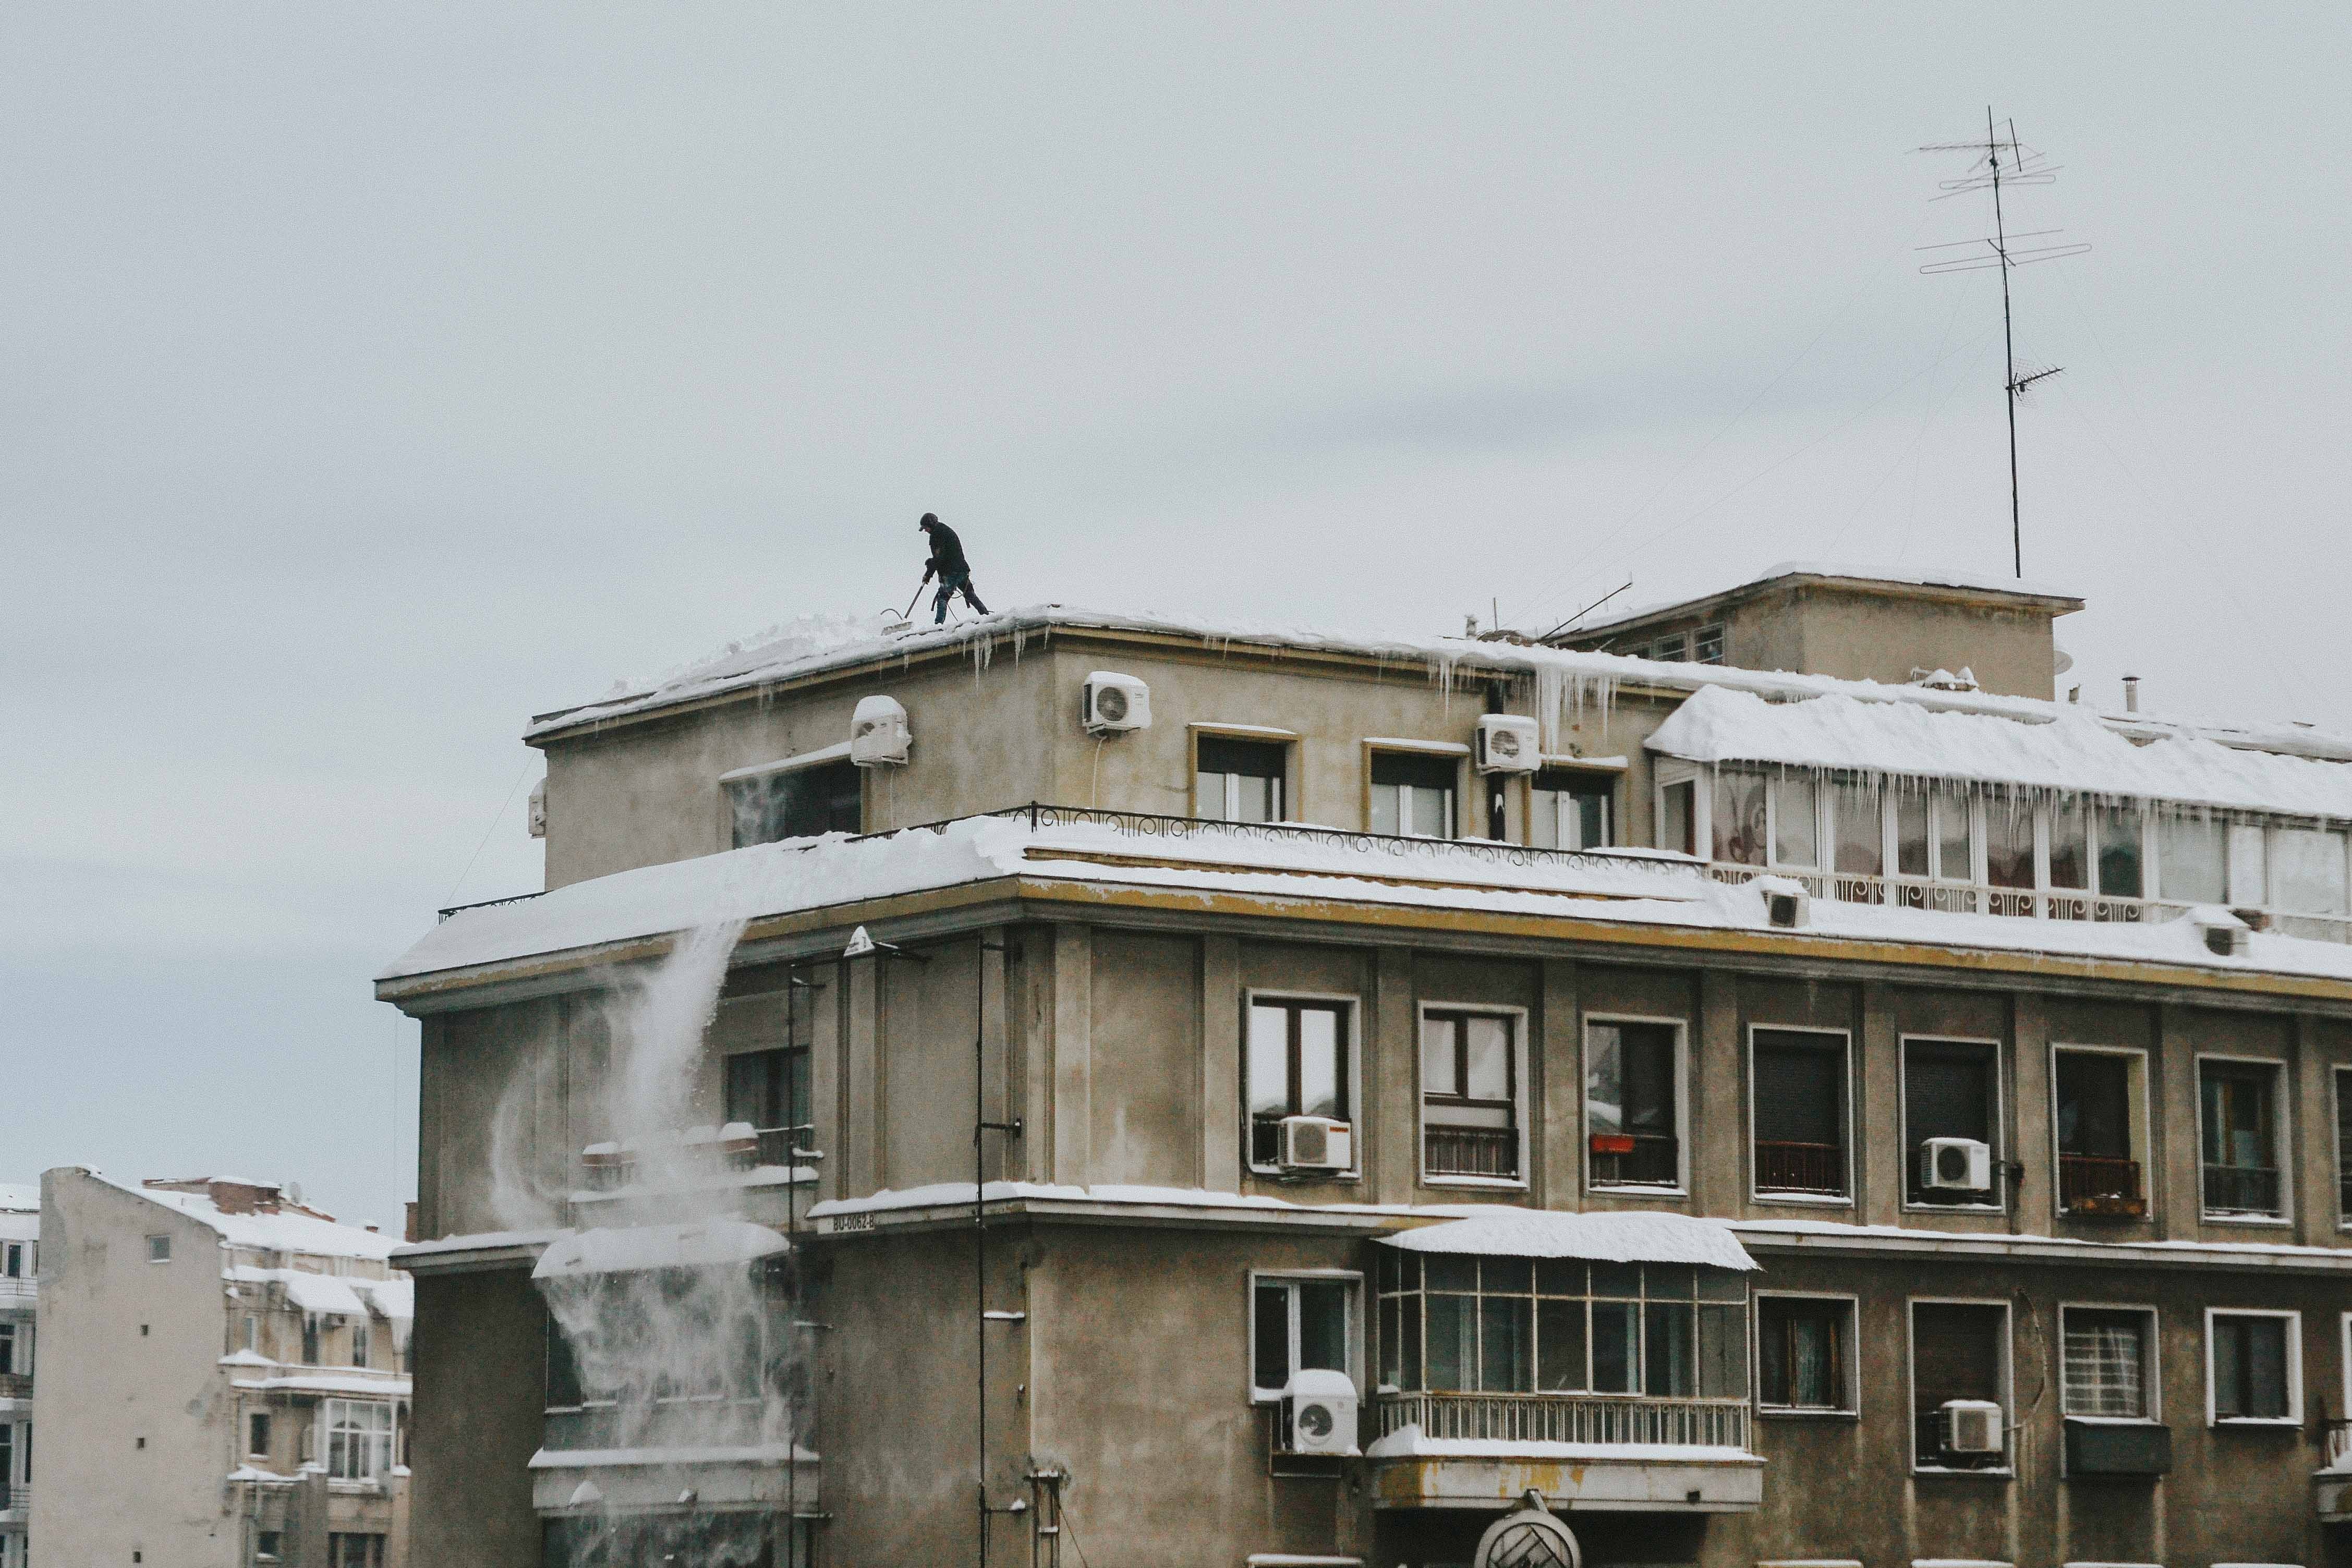 man on top of building removing the snow